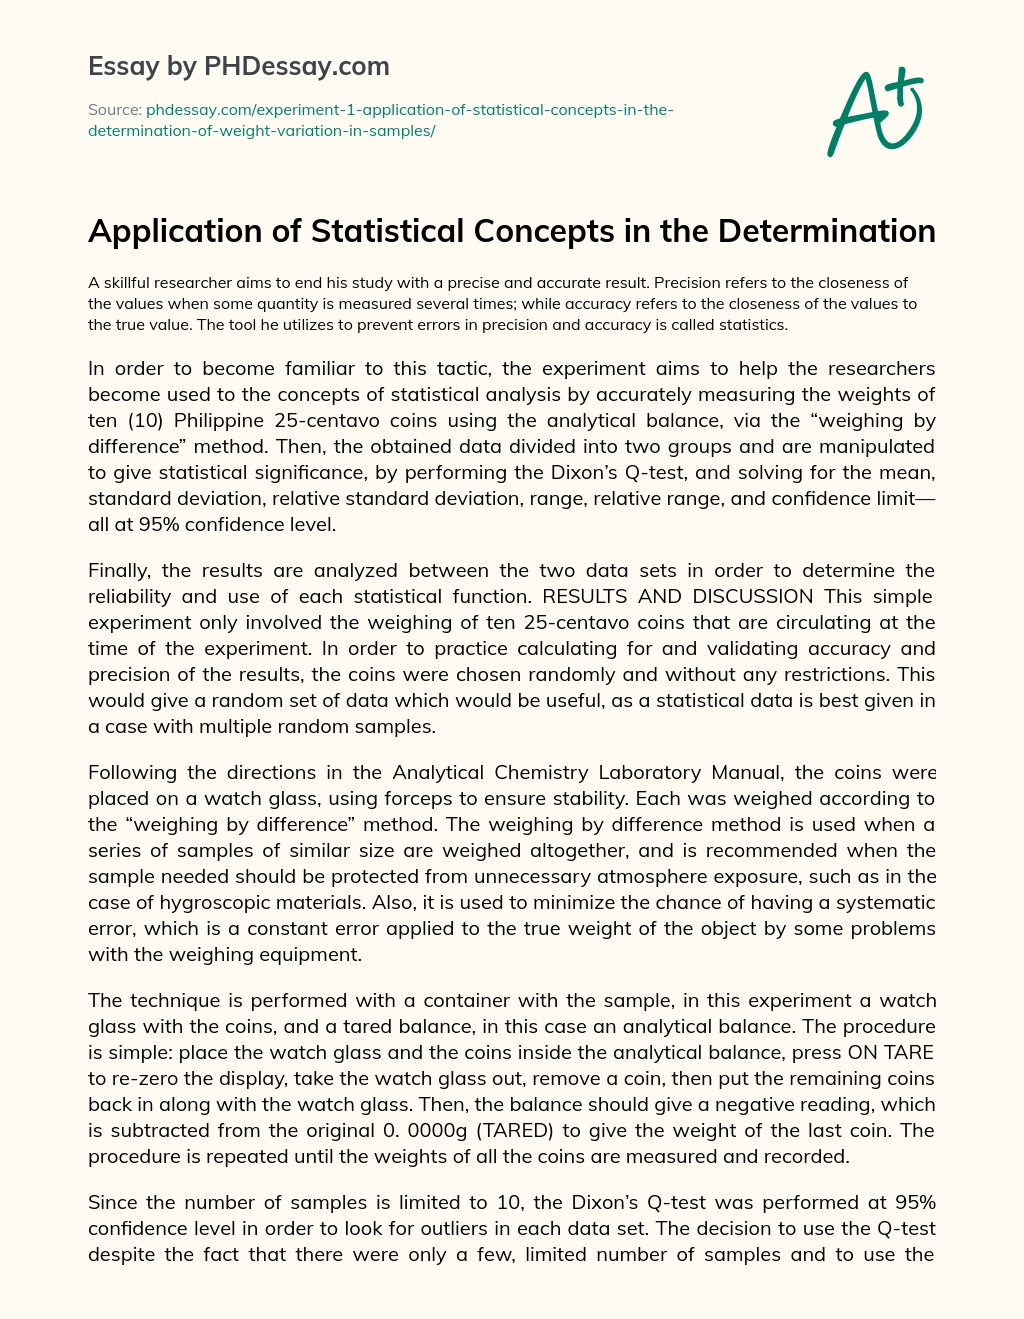 Application of Statistical Concepts in the Determination essay